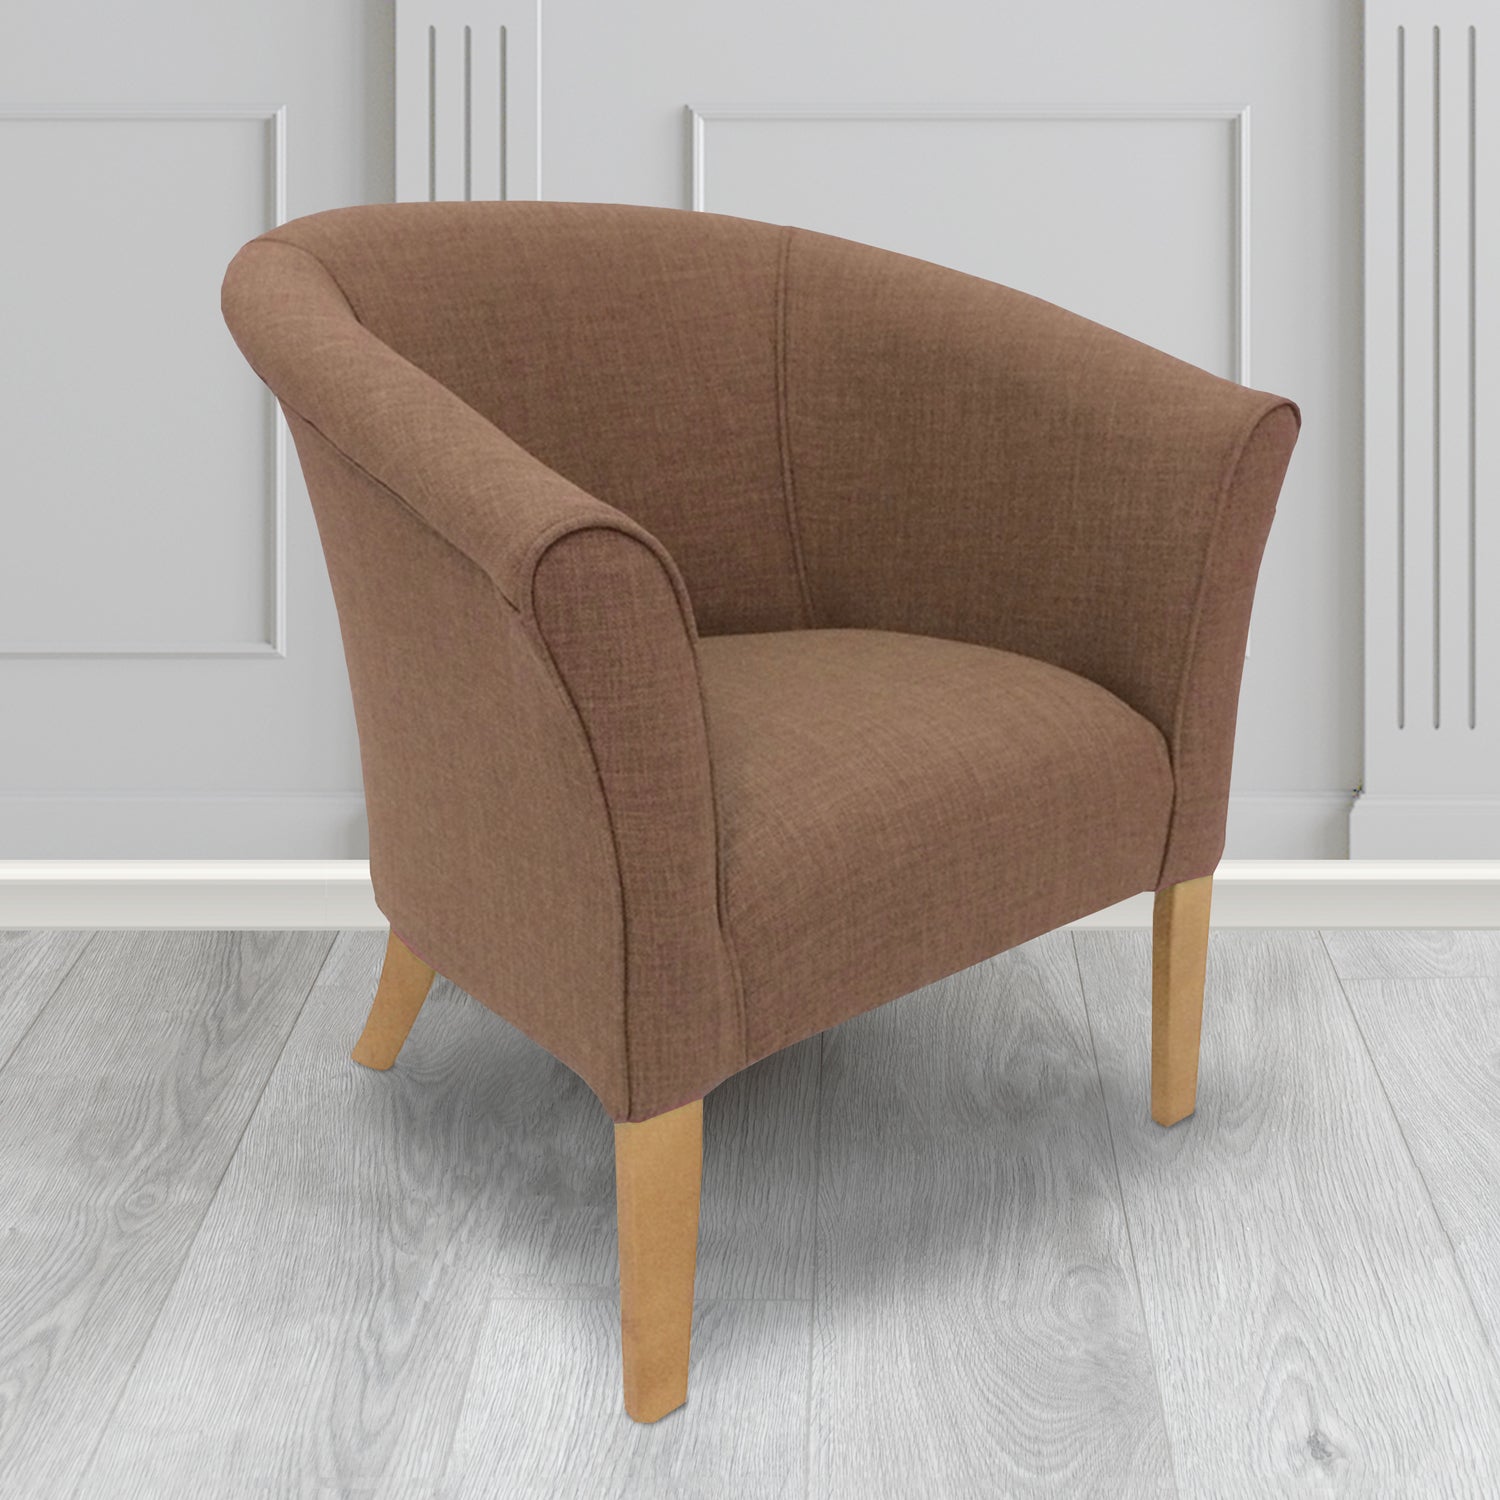 Quill Tub Chair in Linetta Nutmeg Crib 5 Plain Fabric - Antimicrobial, Stain Resistant & Waterproof - The Tub Chair Shop